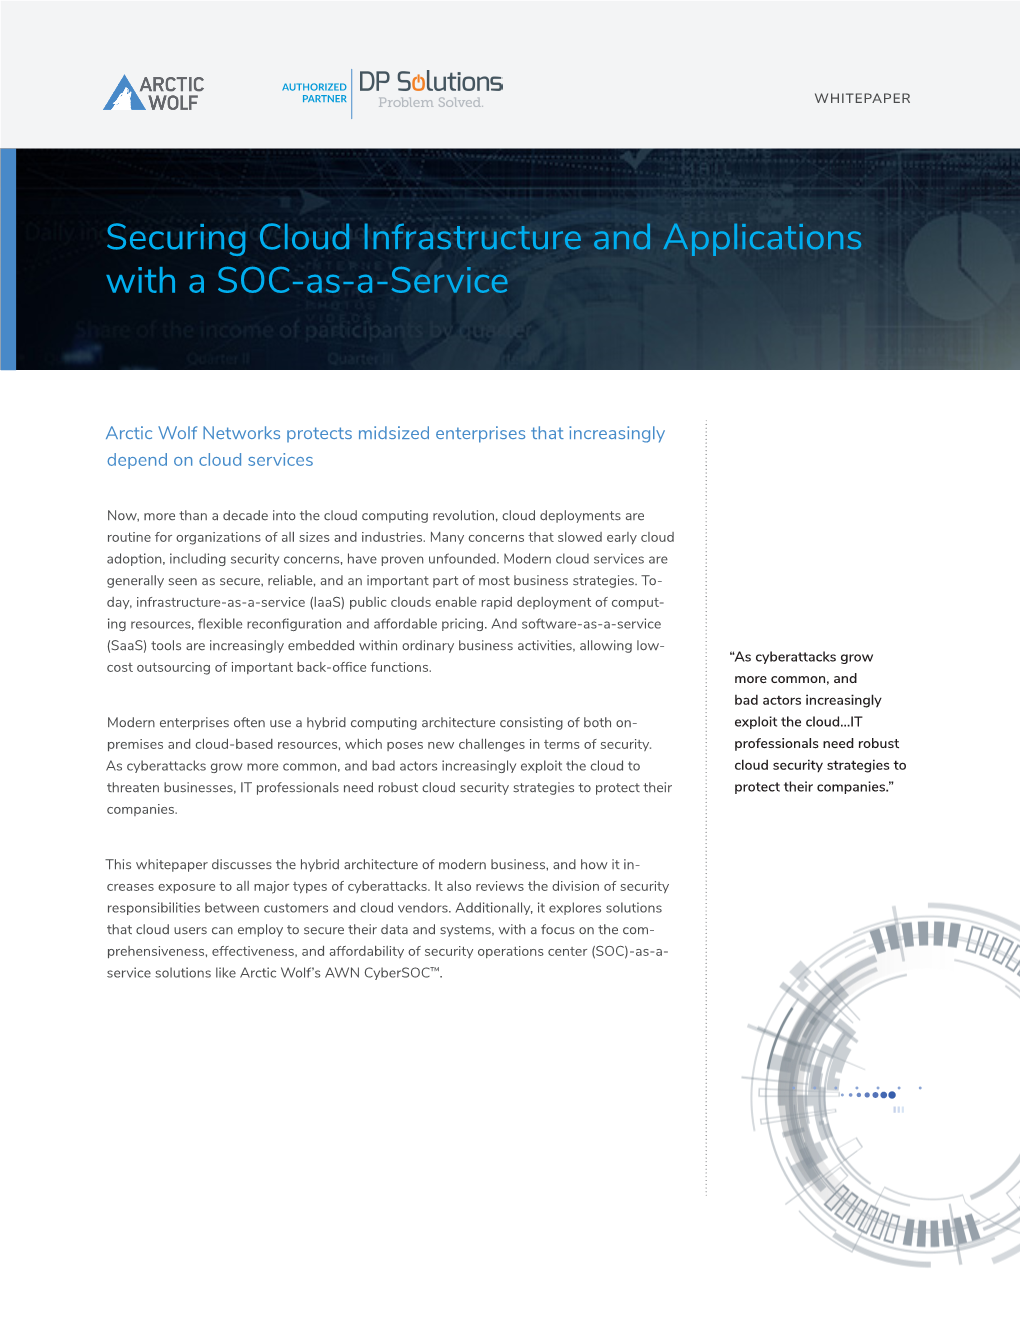 Securing Cloud Infrastructure and Applications with a SOC-As-A-Service